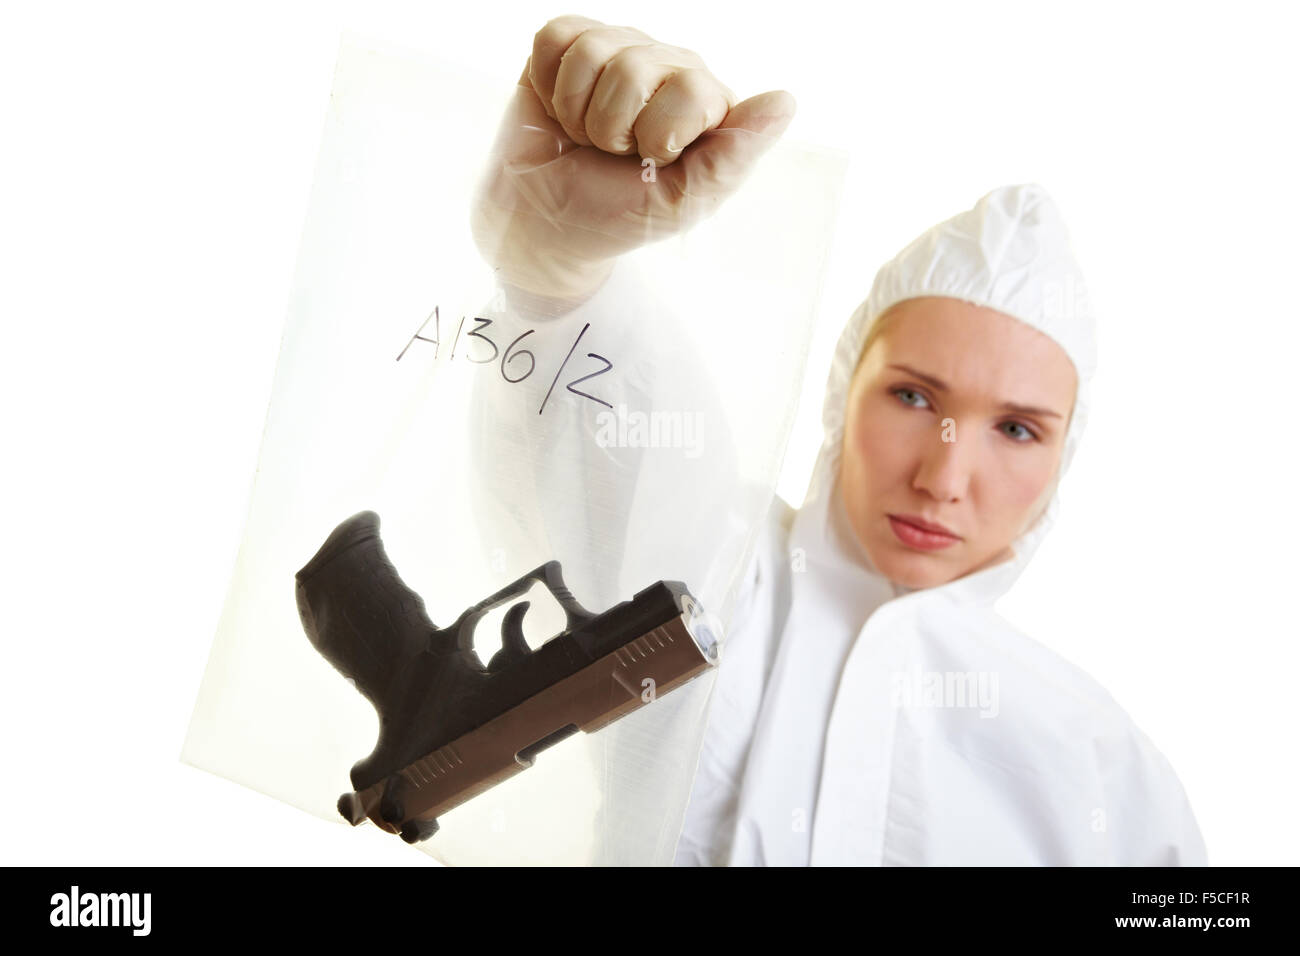 Female forensic scientist holding a weapon as evidence Stock Photo